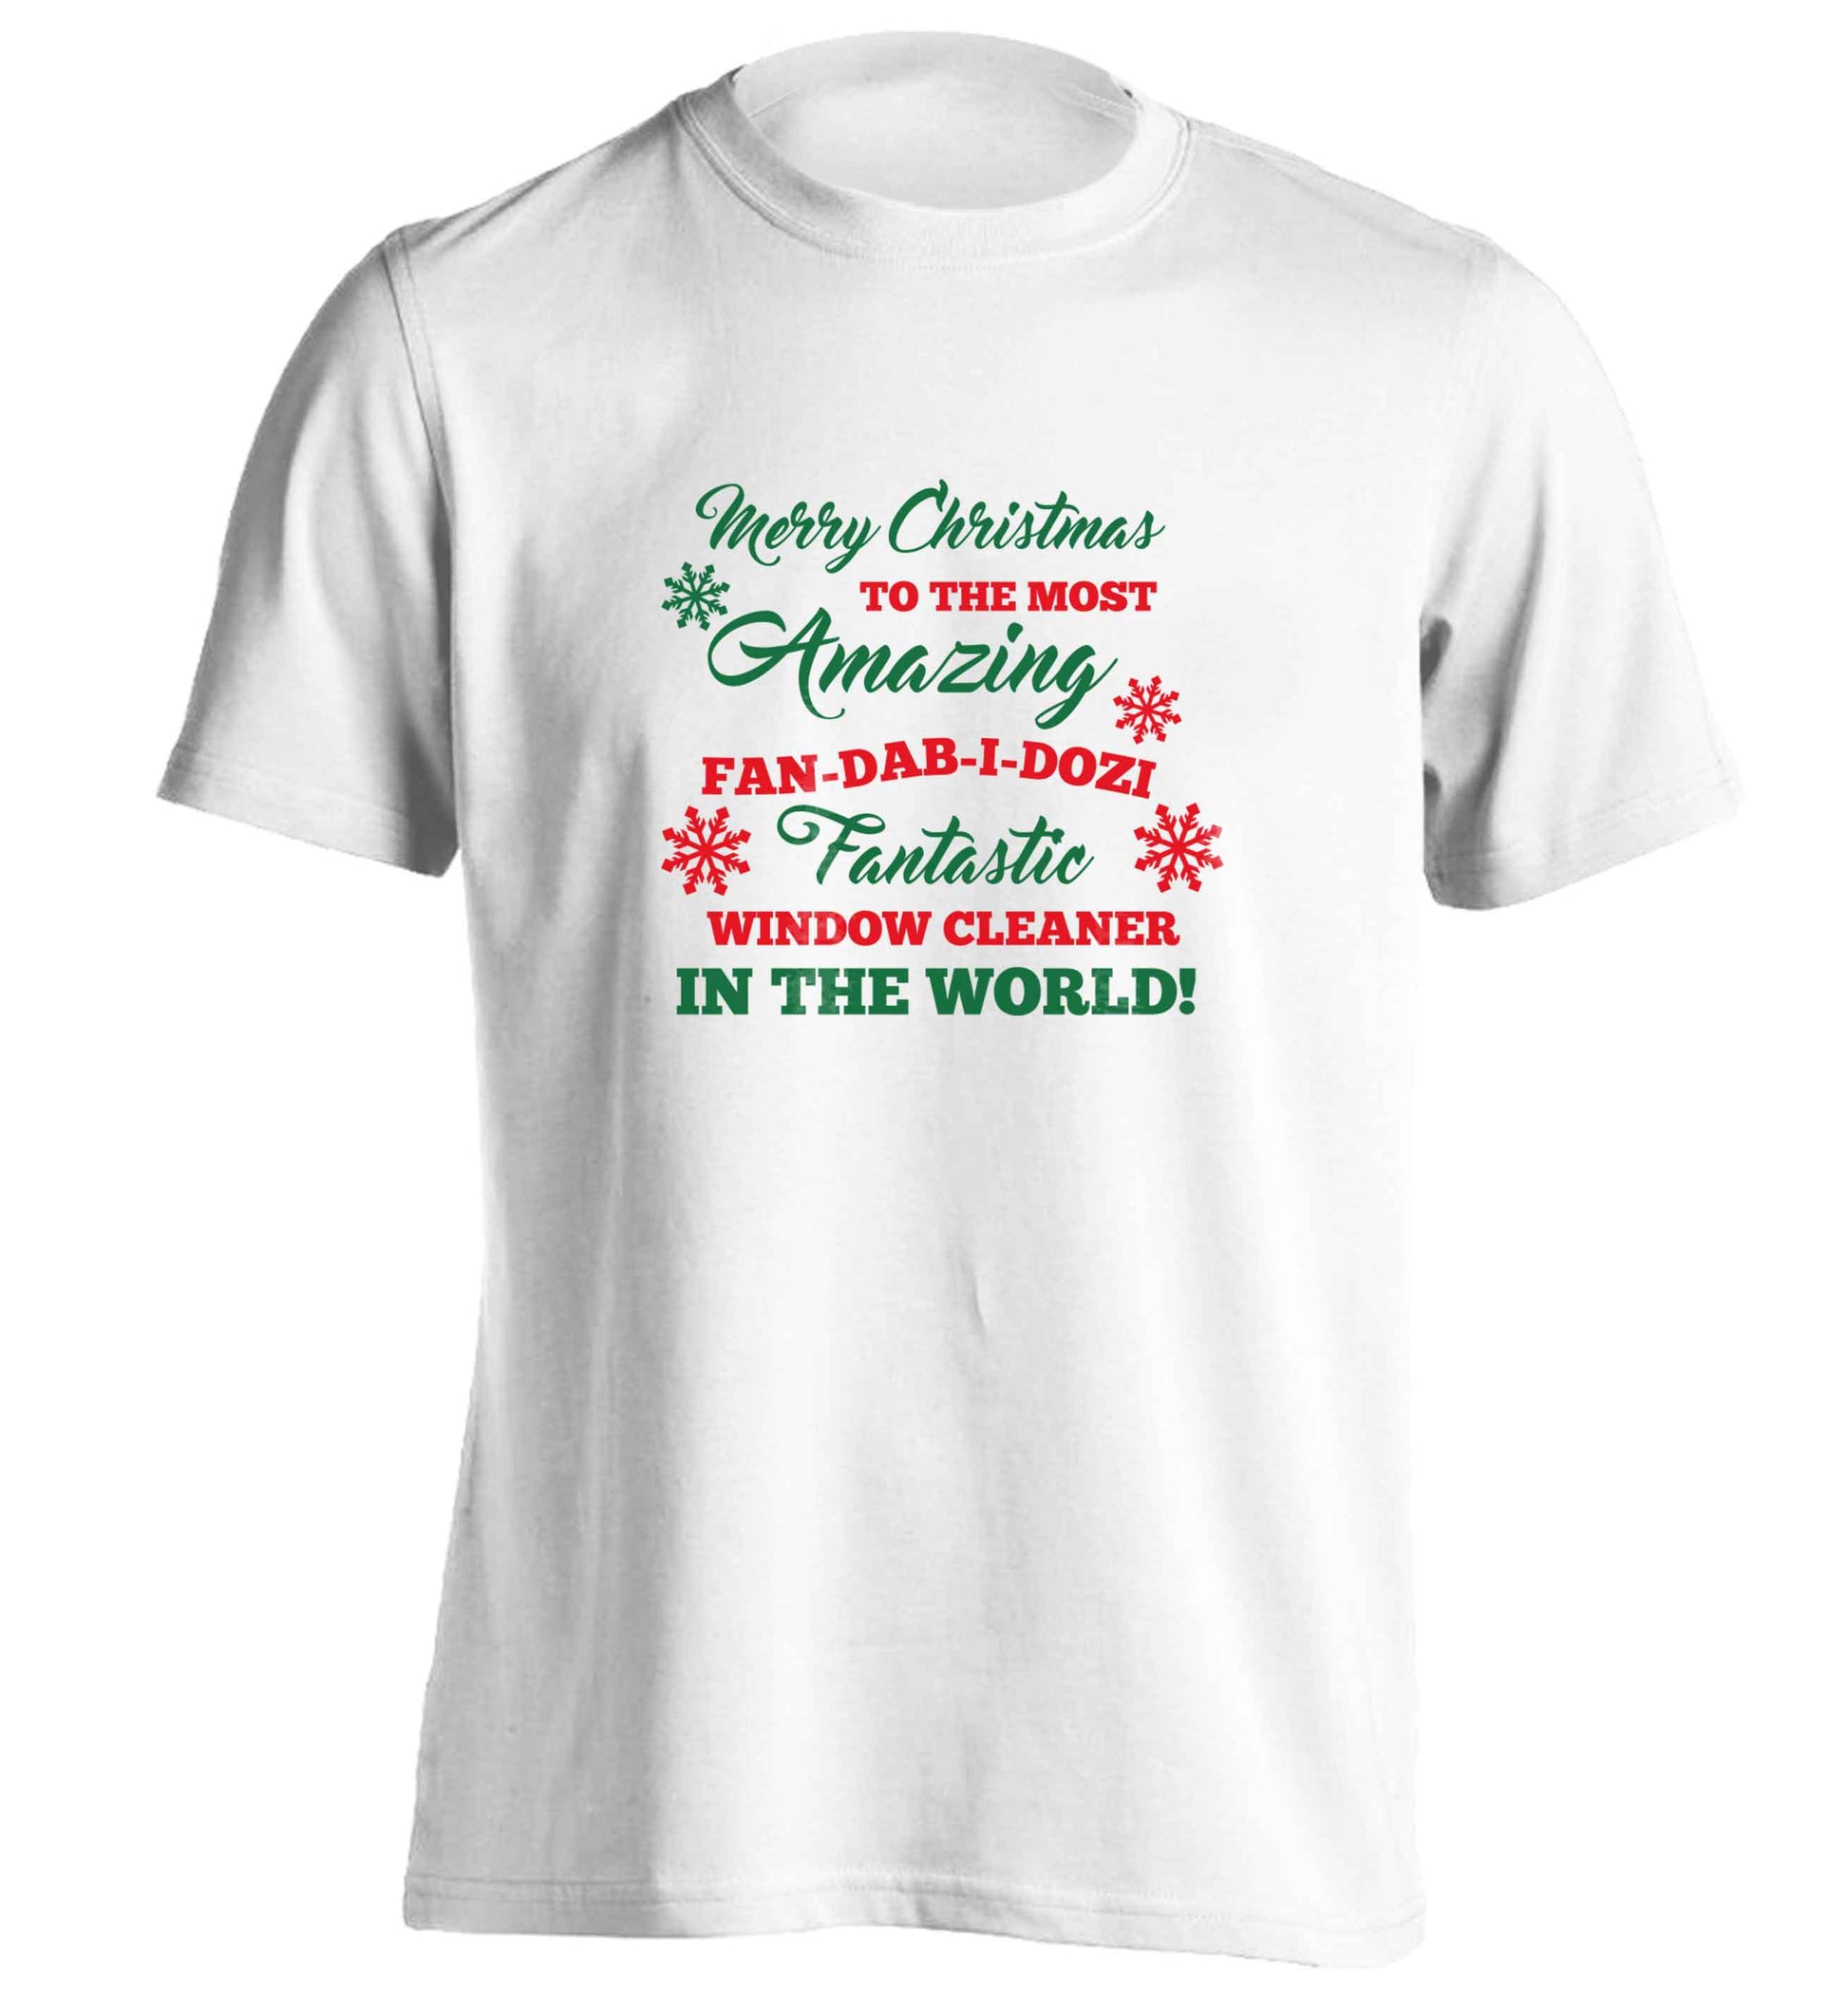 Merry Christmas to the most amazing window cleaner in the world! adults unisex white Tshirt 2XL